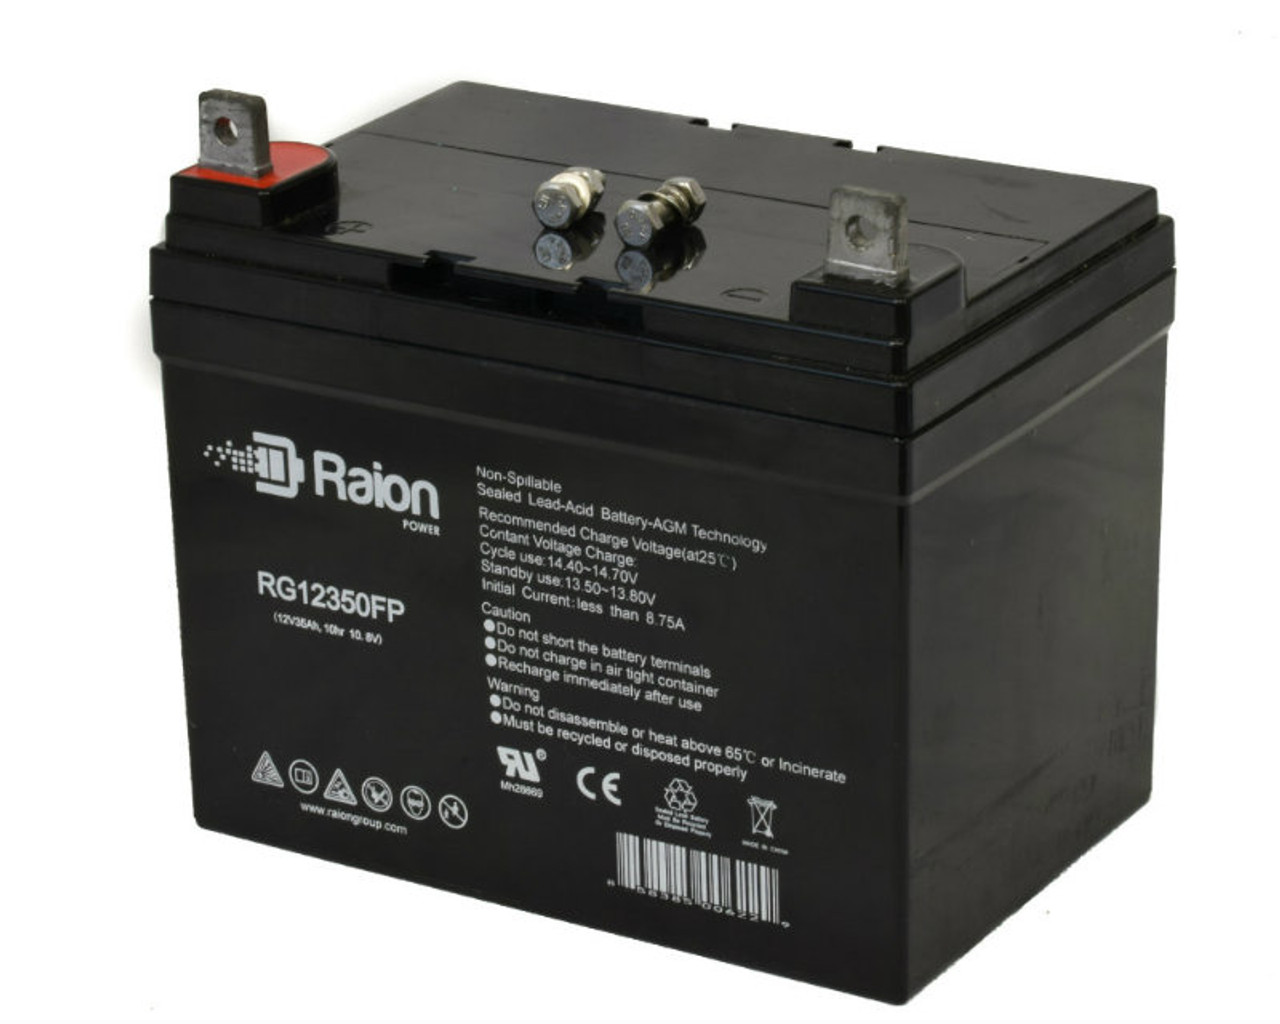 Raion Power Replacement 12V 35Ah RG12350FP Battery for Ariens Gravely 931000